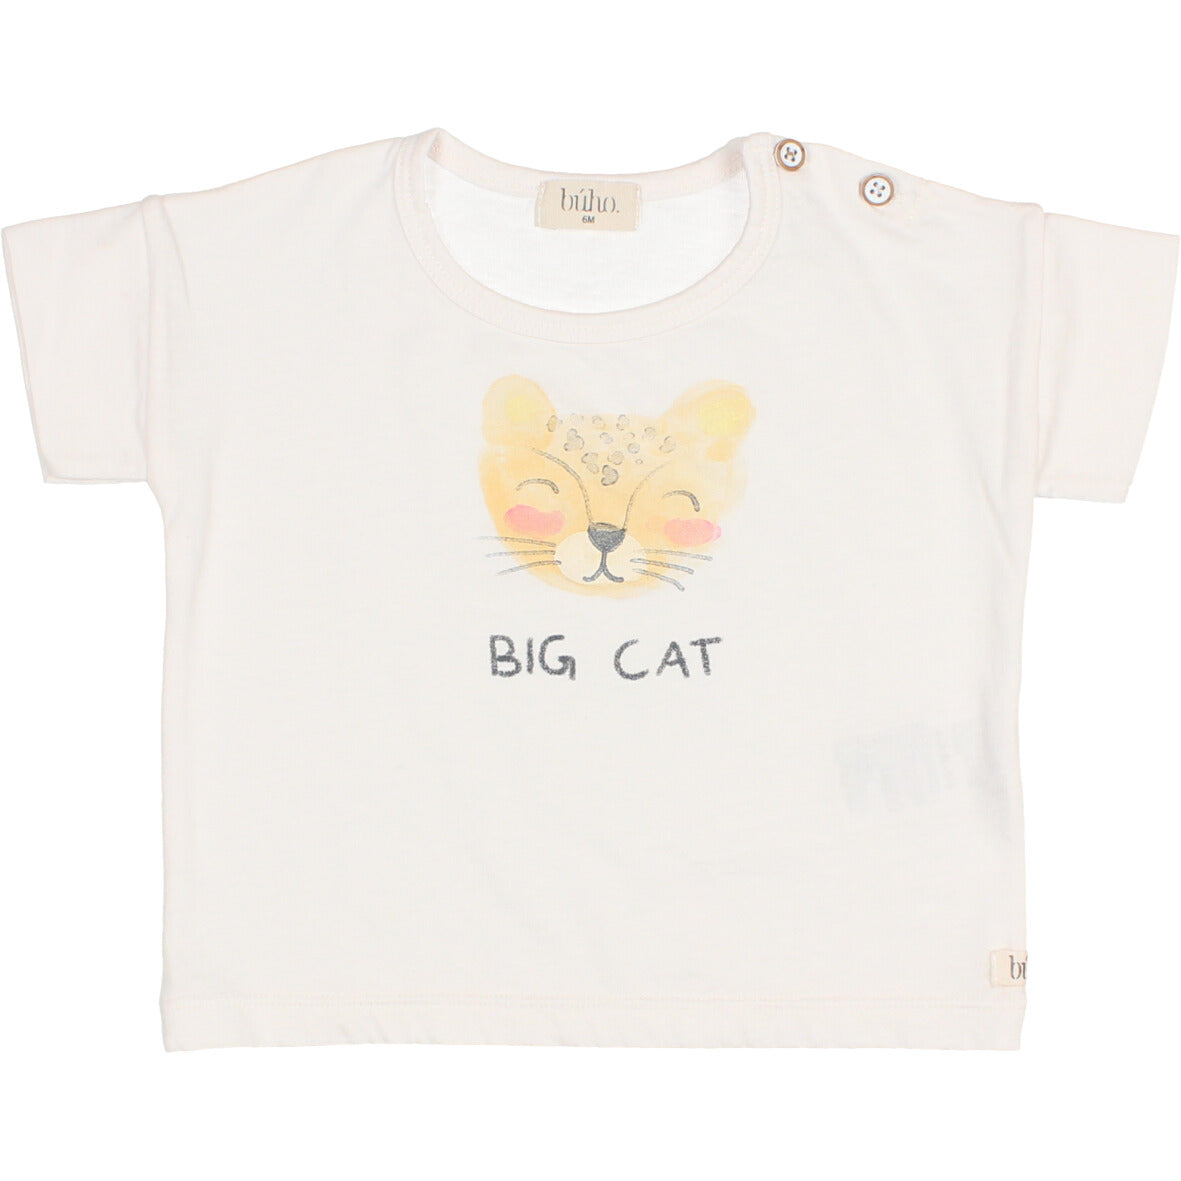 Buho Baby Cat Outfit Set